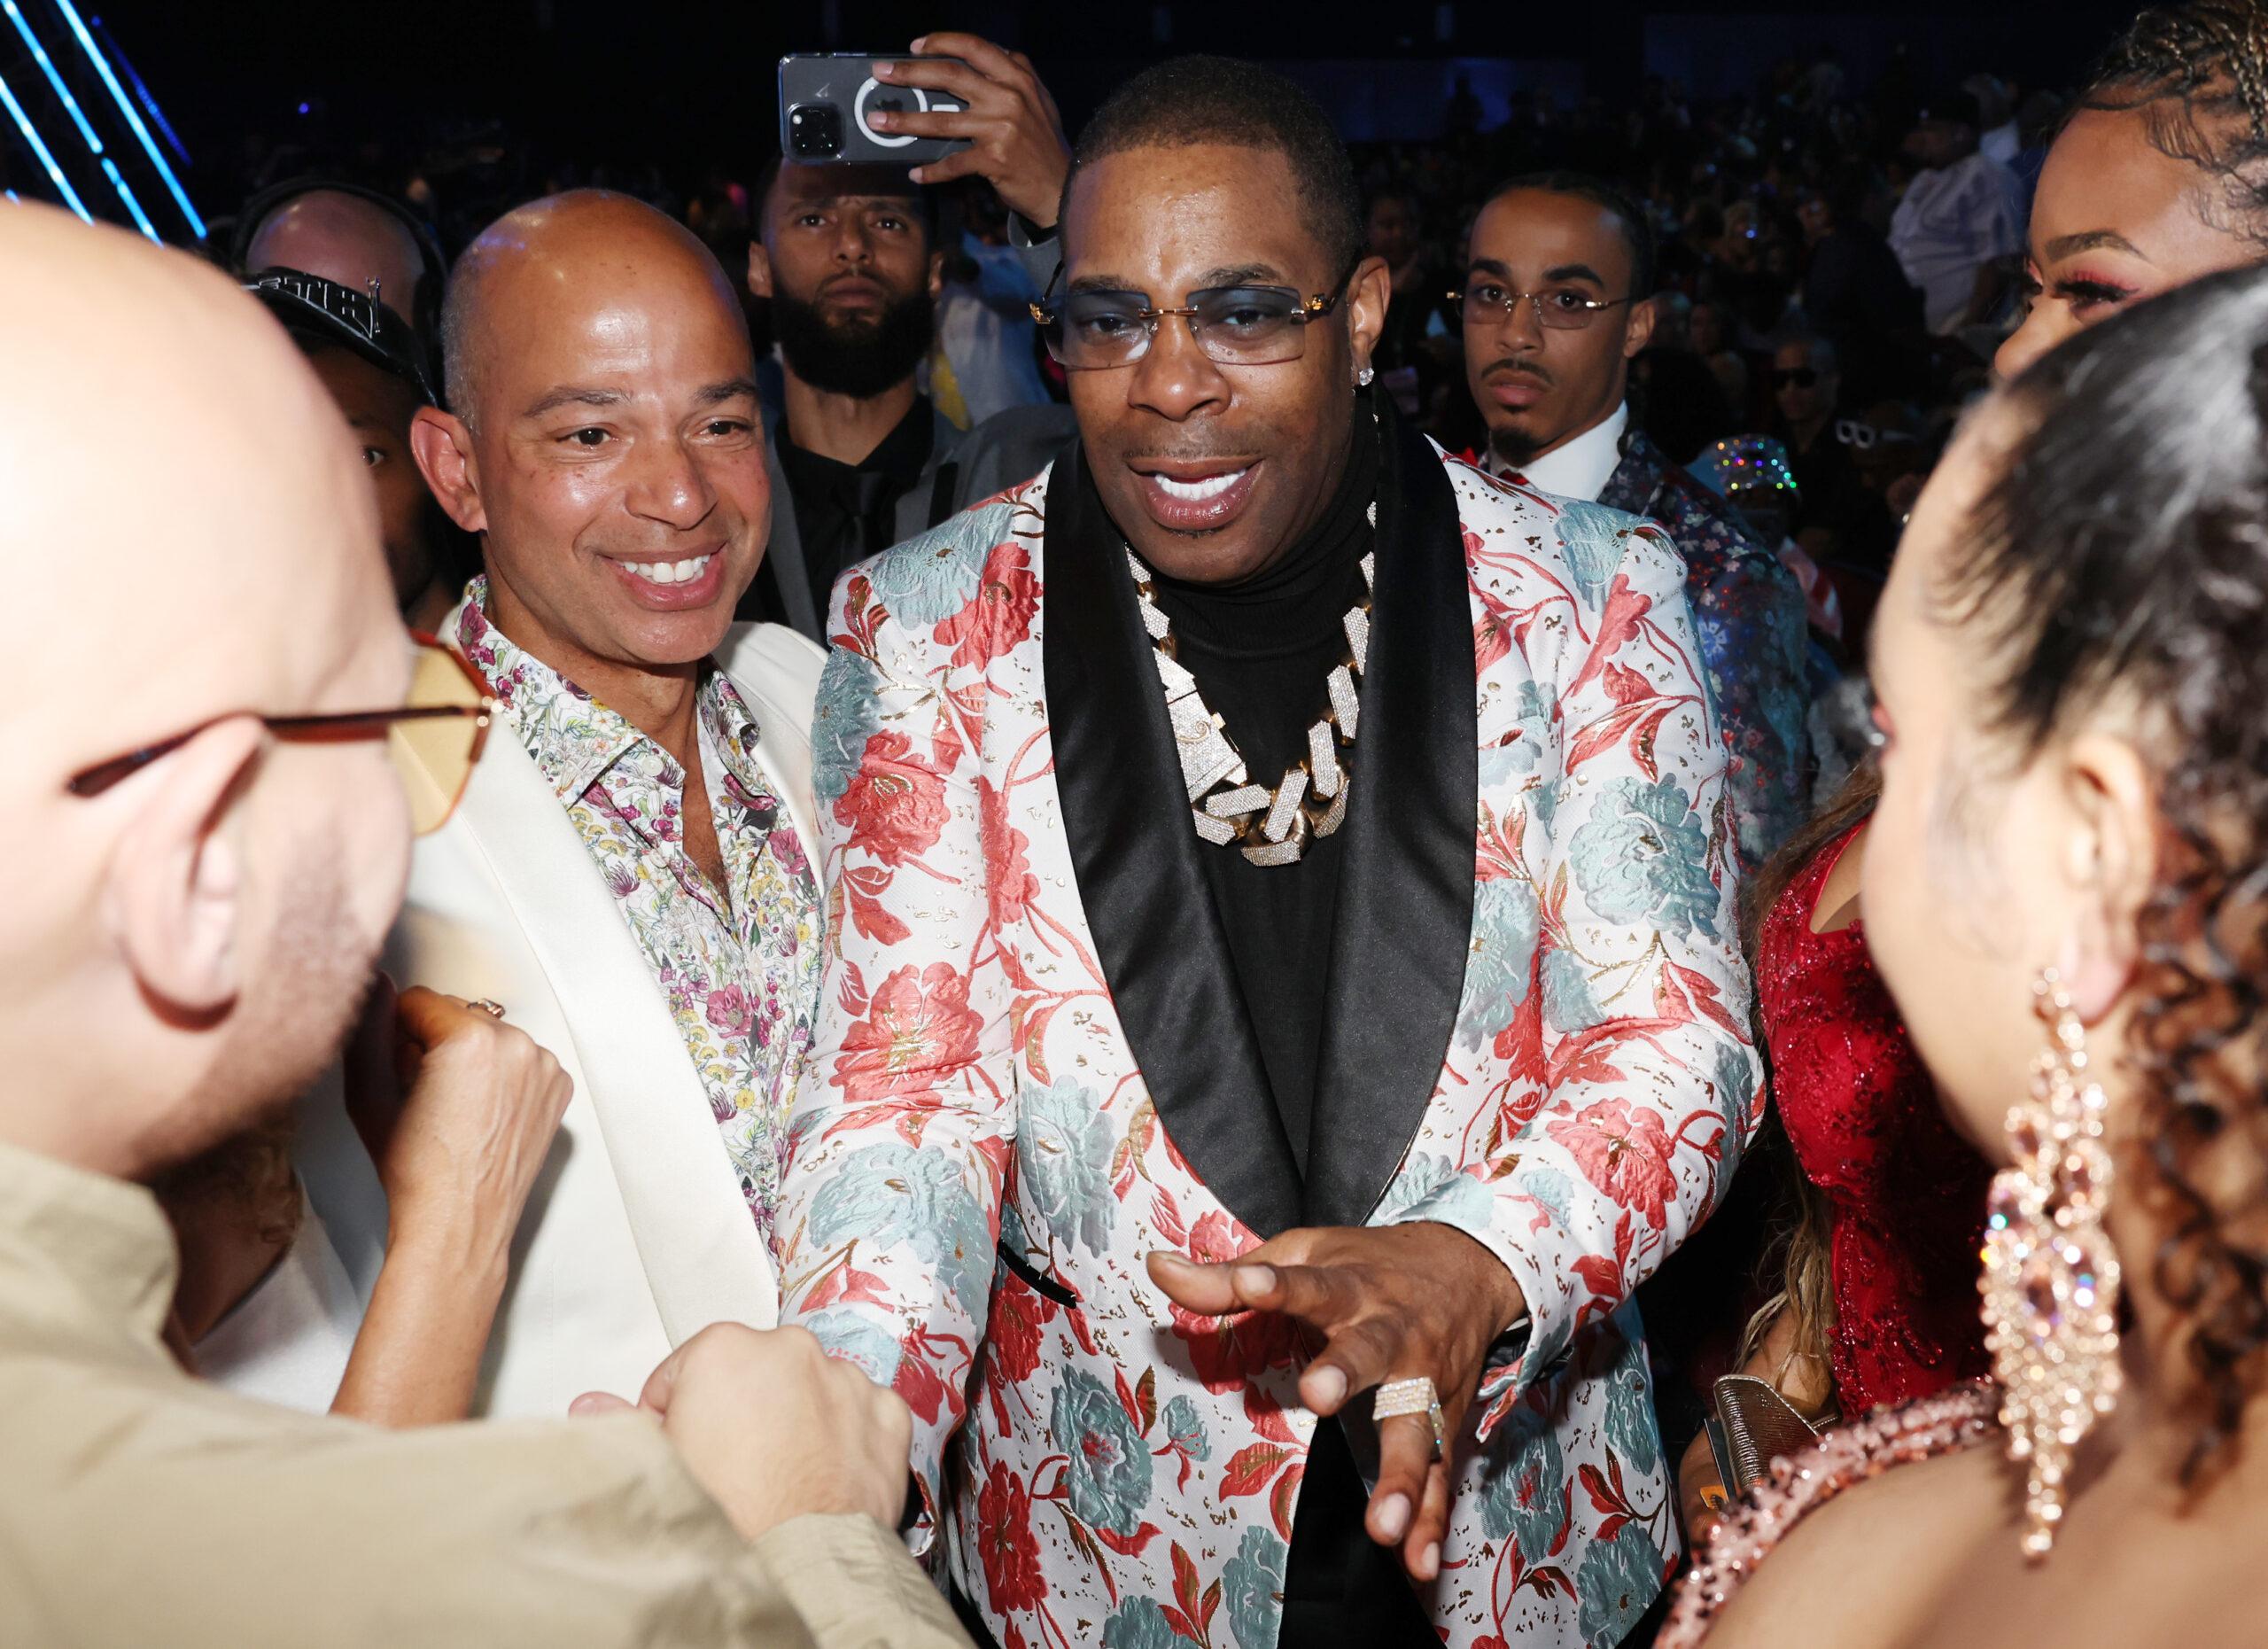 Busta Rhymes Breaks Down Into Tears Accepting Lifetime Achievement Award At 2023 Bet Awards 9234